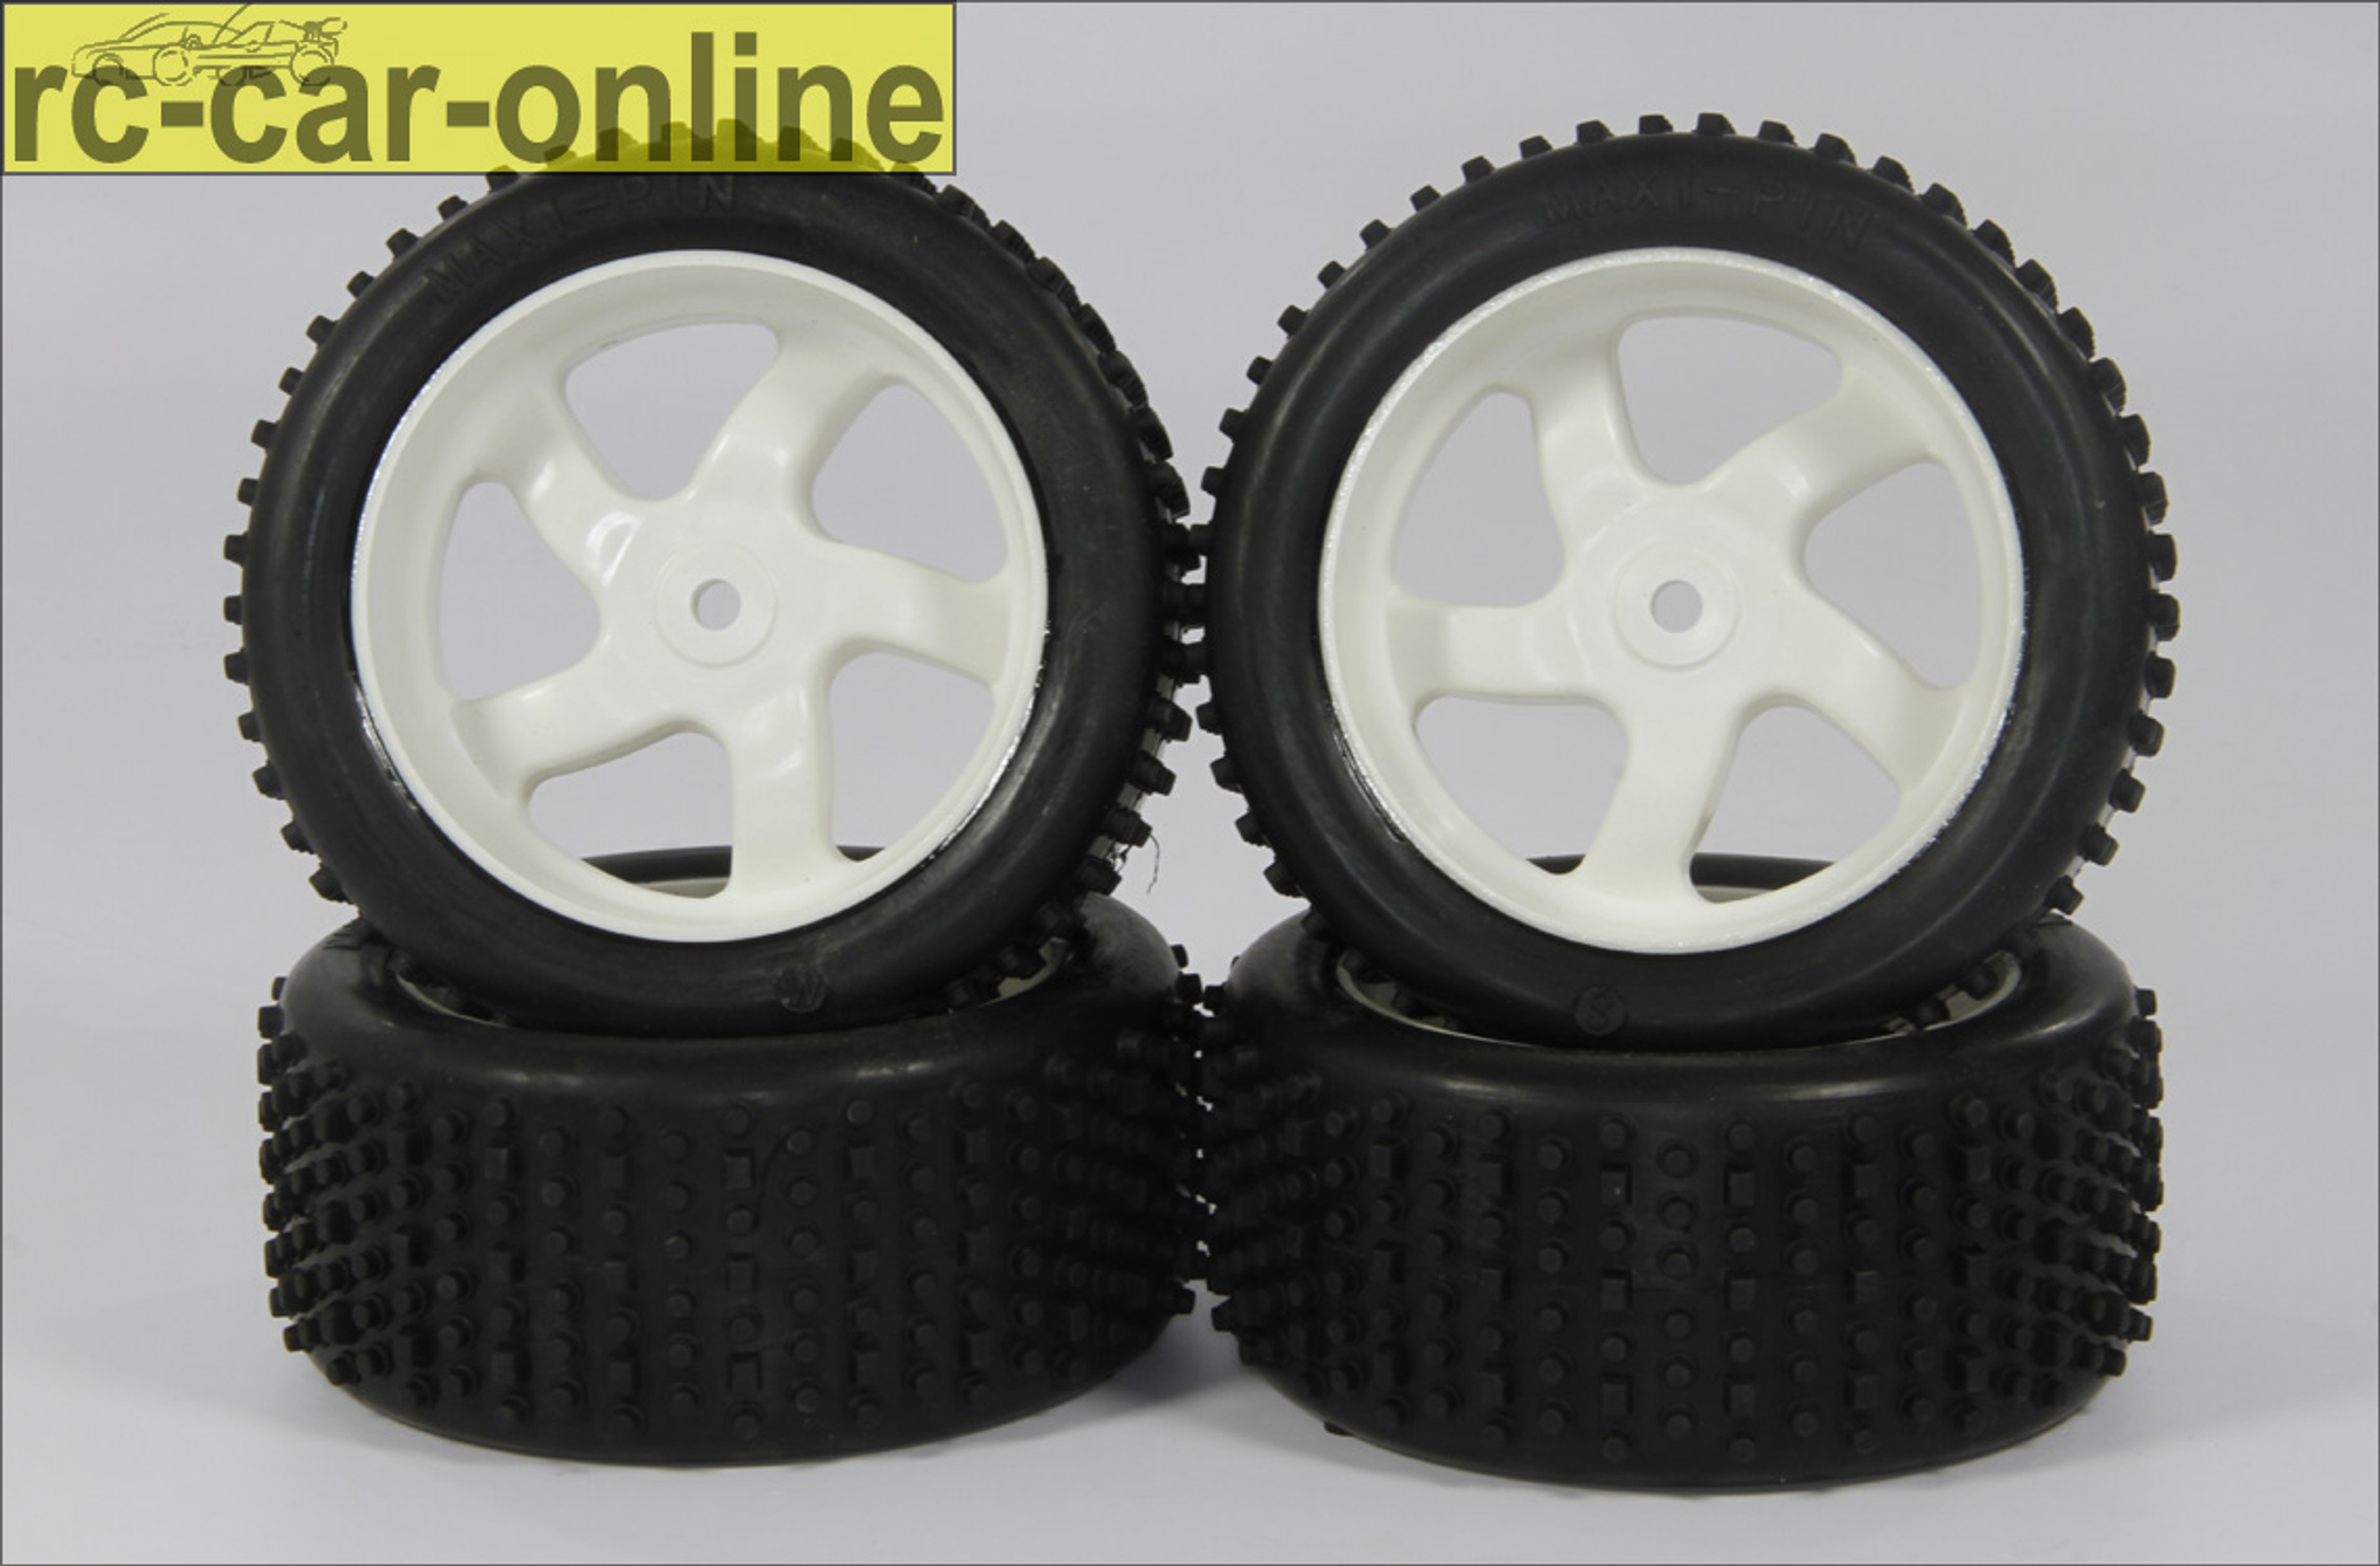 y1382 Maxi-Pin 1/6 offroad competition tire, 1 pair M and 1 pair H